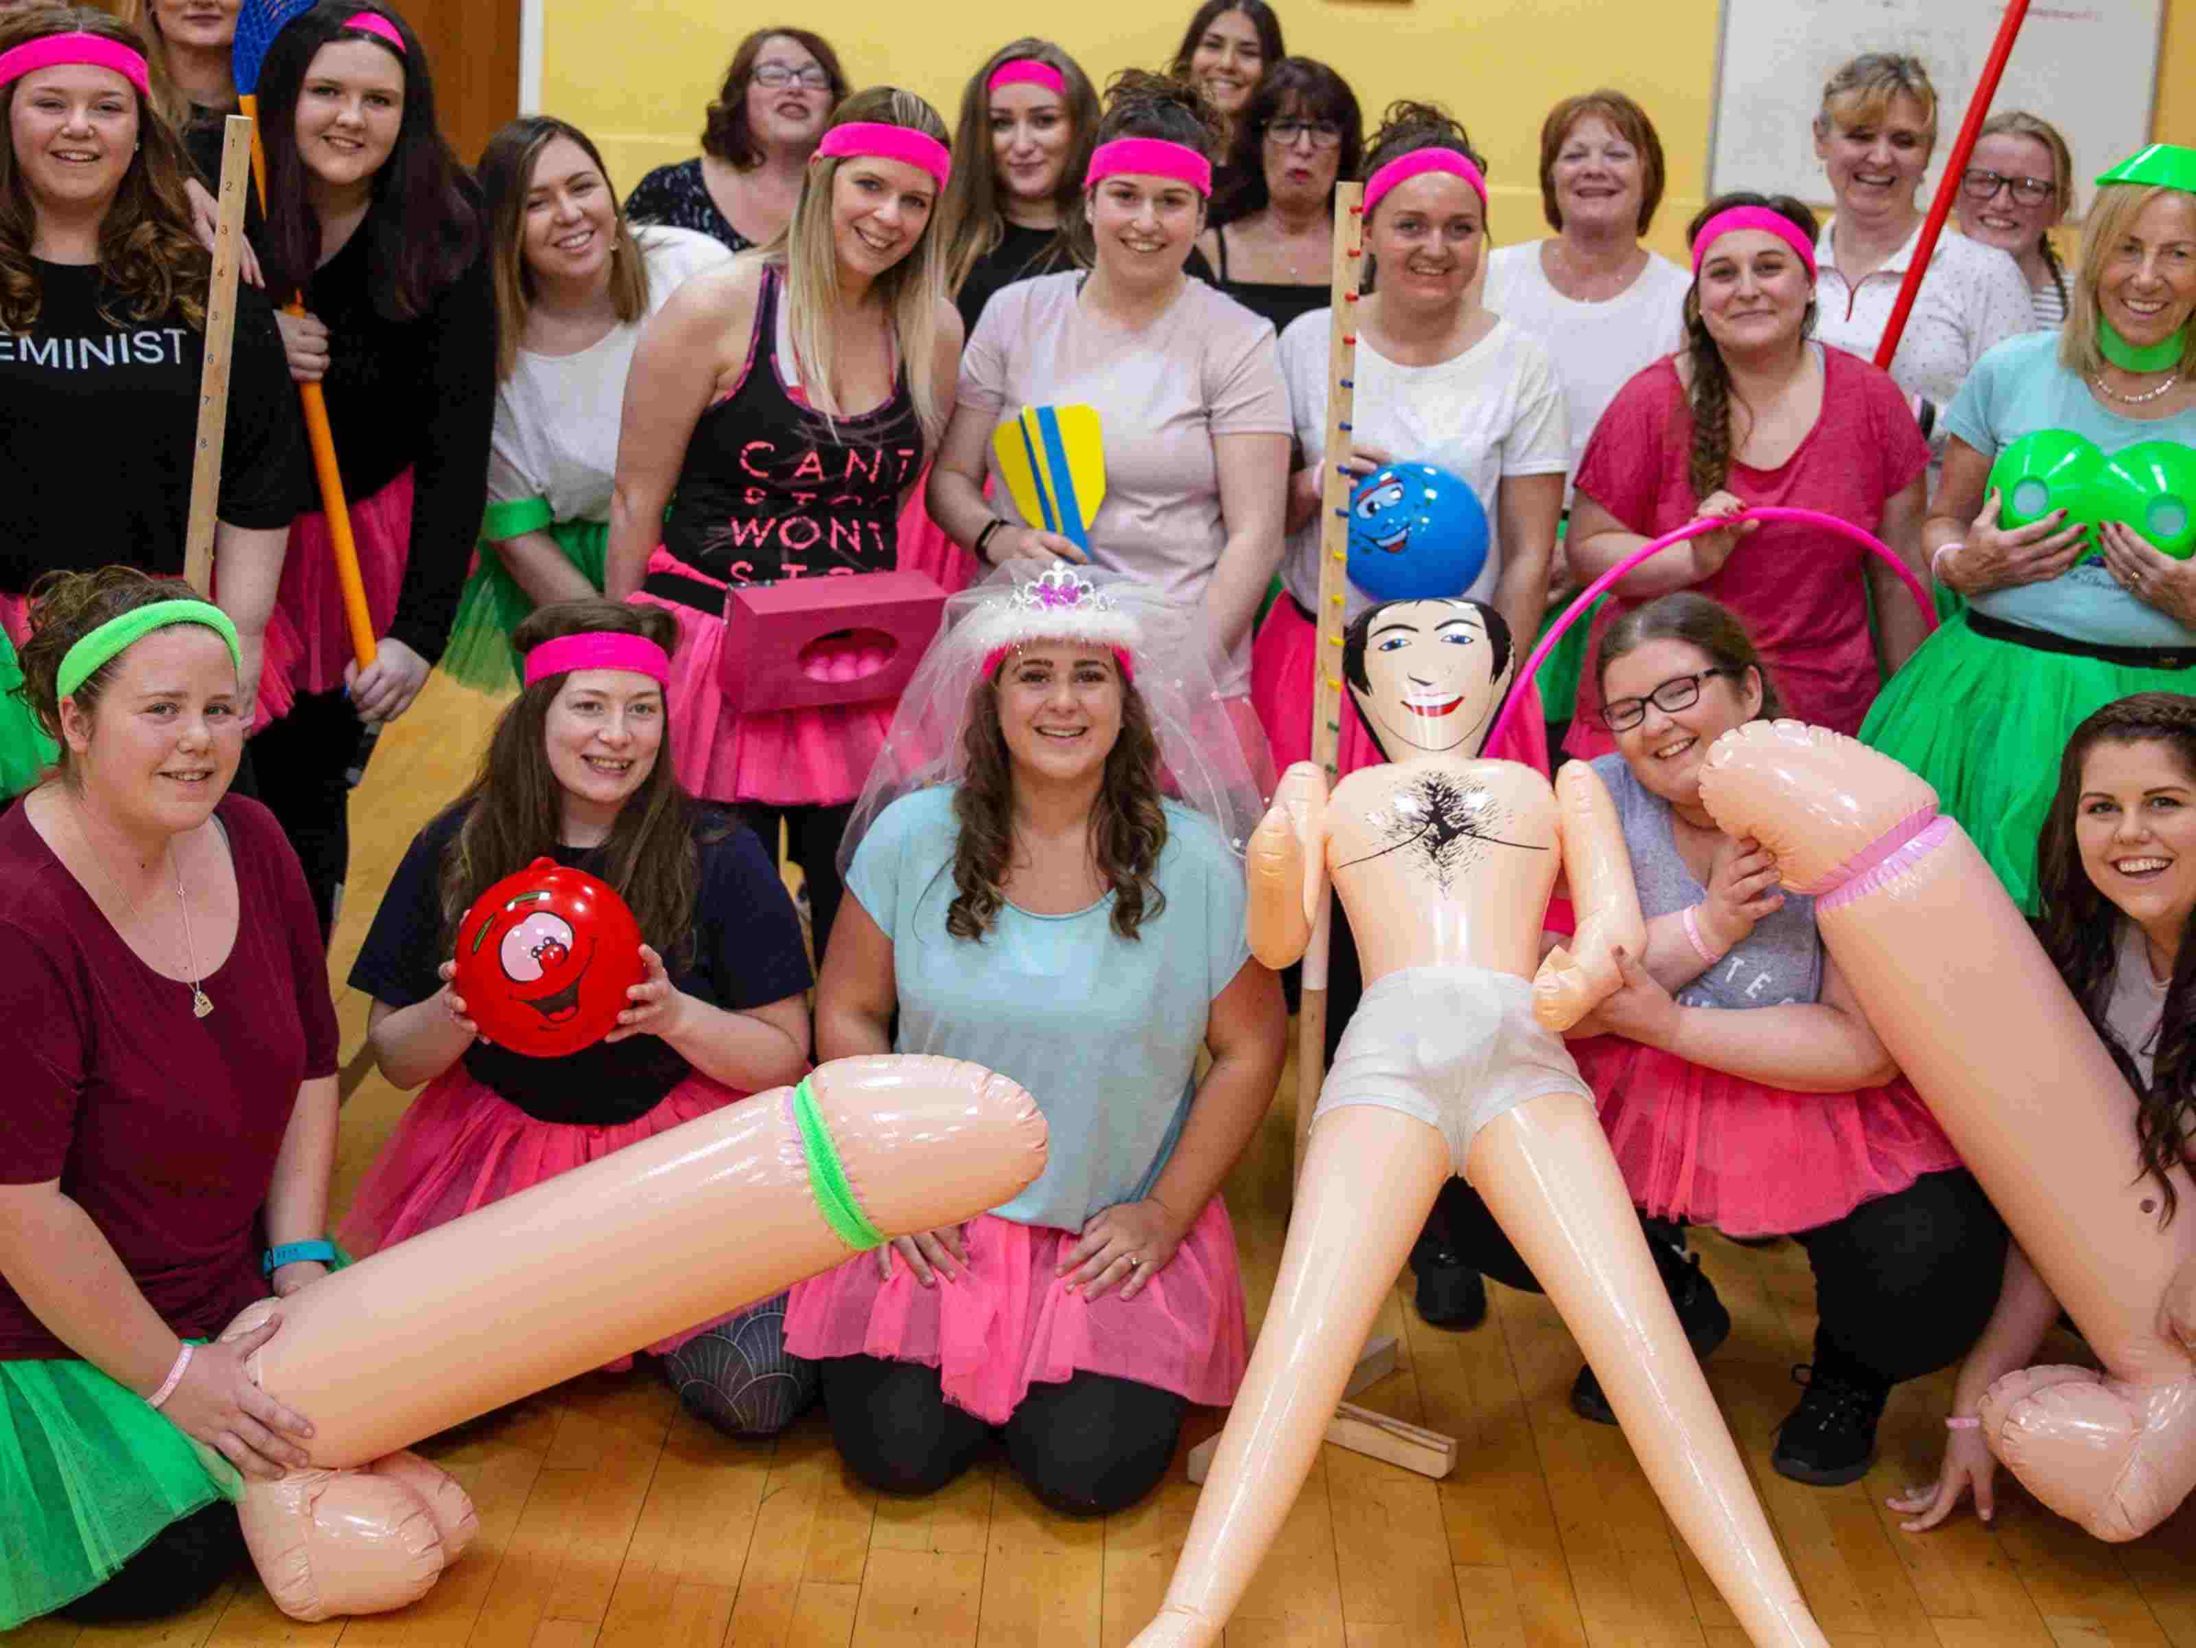 Greatest Hen Party Activities & Ideas in Cardiff - Olympic Shames